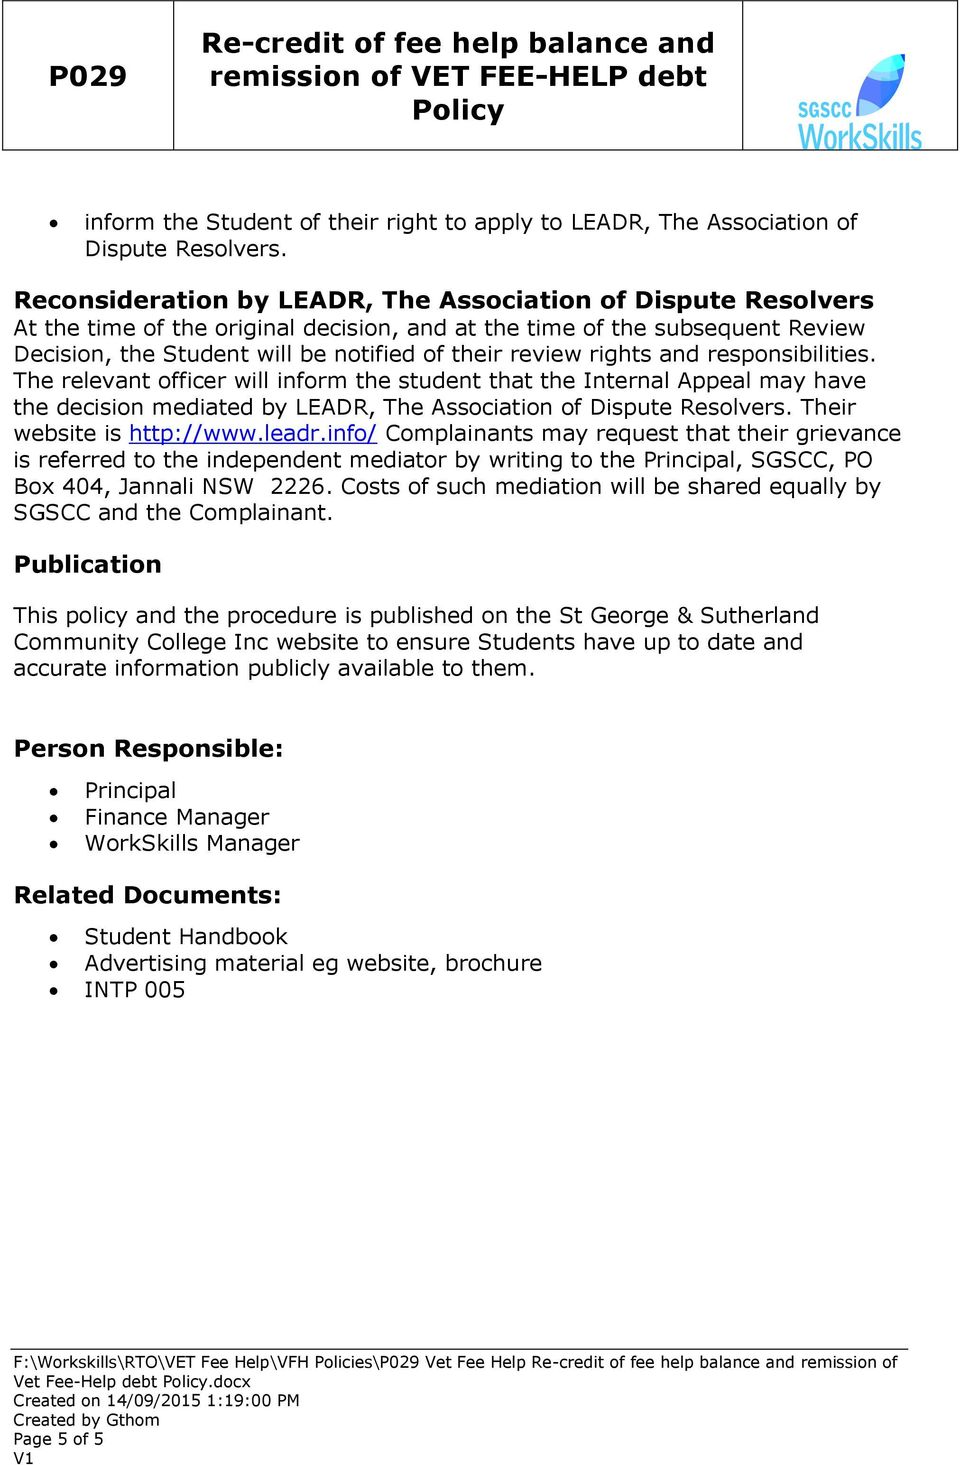 rights and responsibilities. The relevant officer will inform the student that the Internal Appeal may have the decision mediated by LEADR, The Association of Dispute Resolvers.